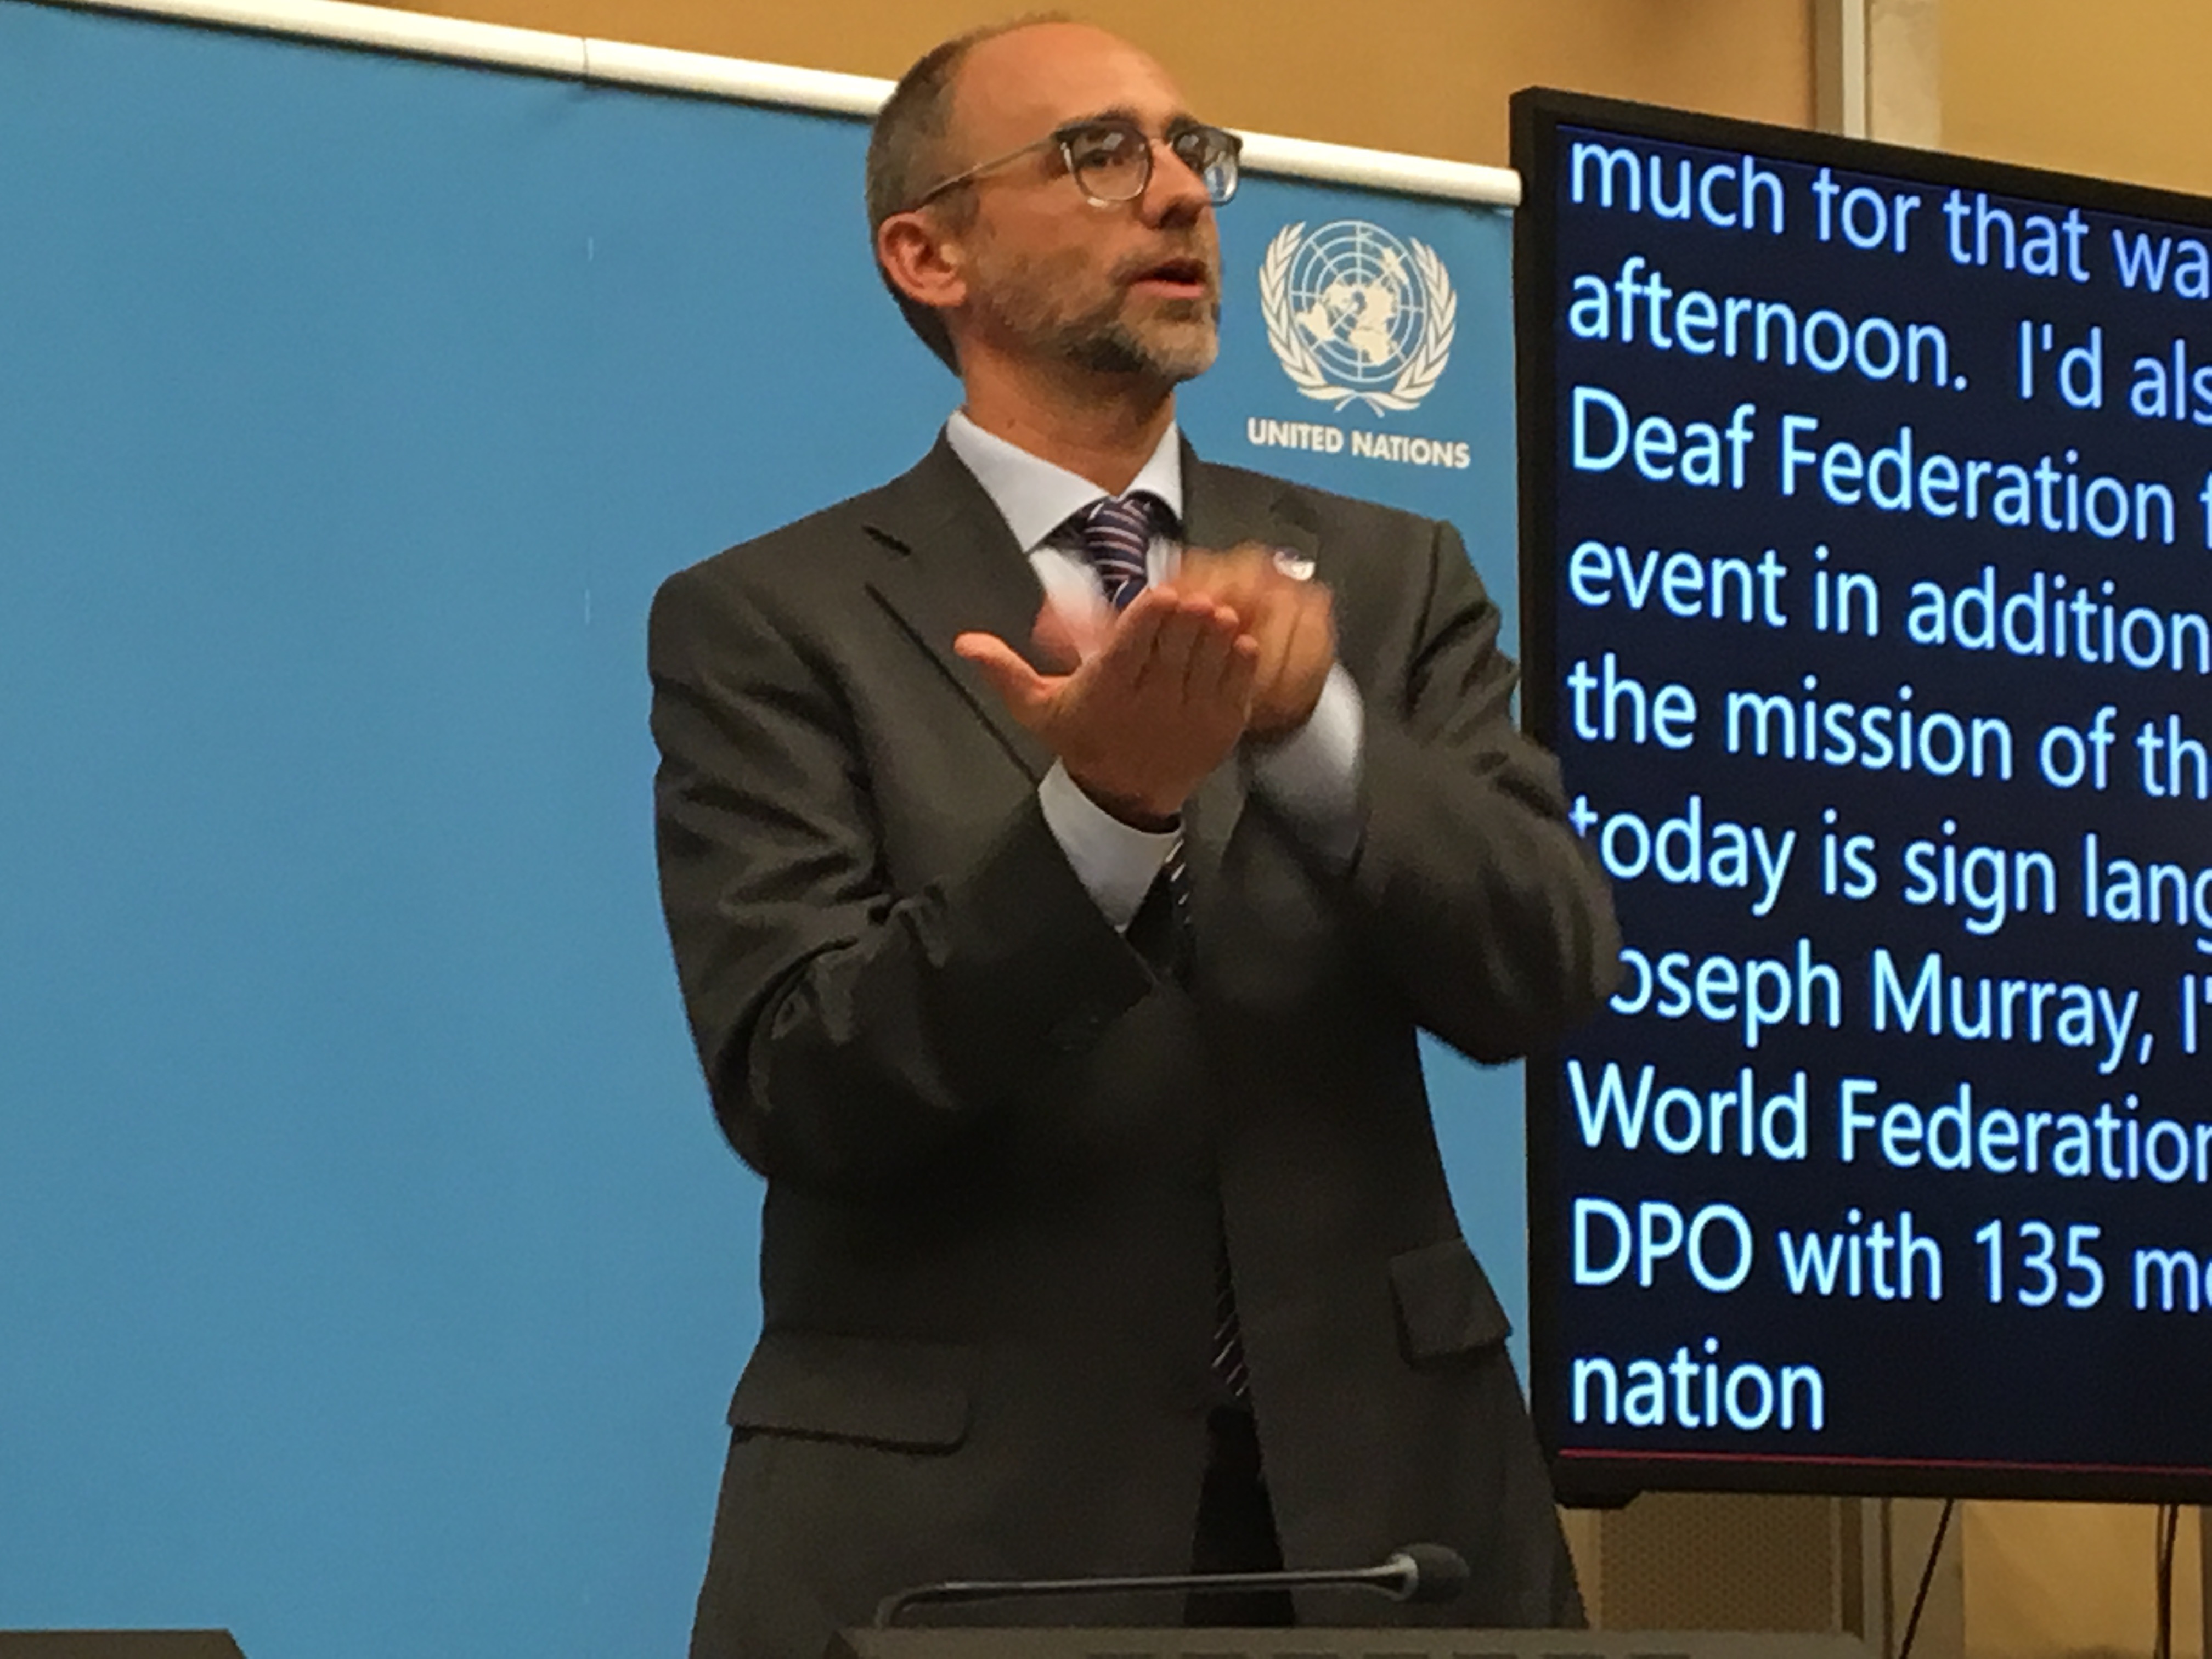 Joe has represented the WFD at the United Nations and other international forums.